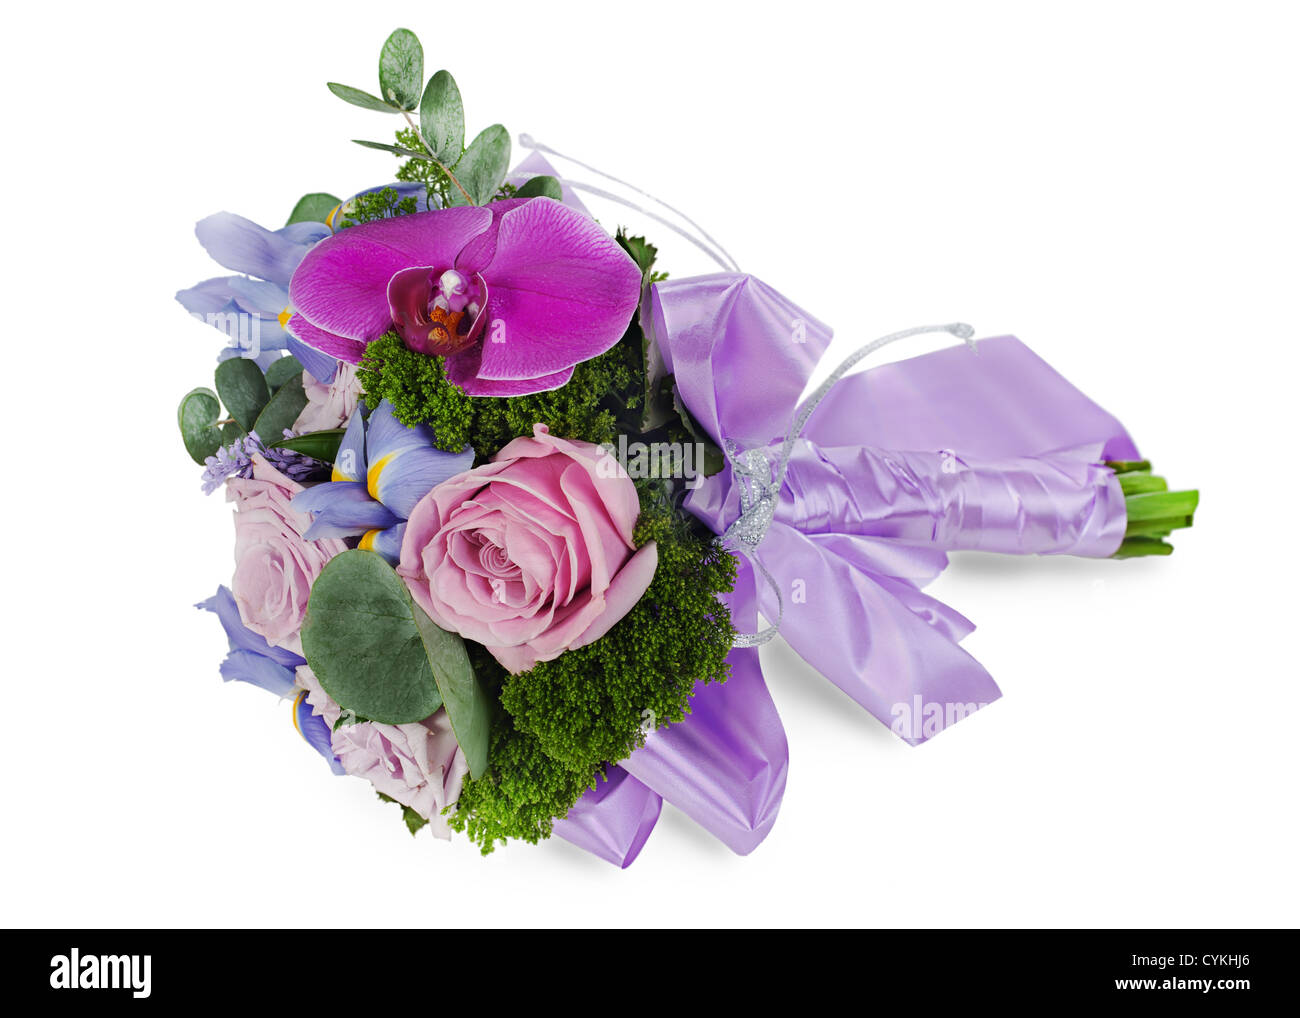 colorful flower wedding bouquet for bride from roses, iris and orchid, isolated on white background Stock Photo